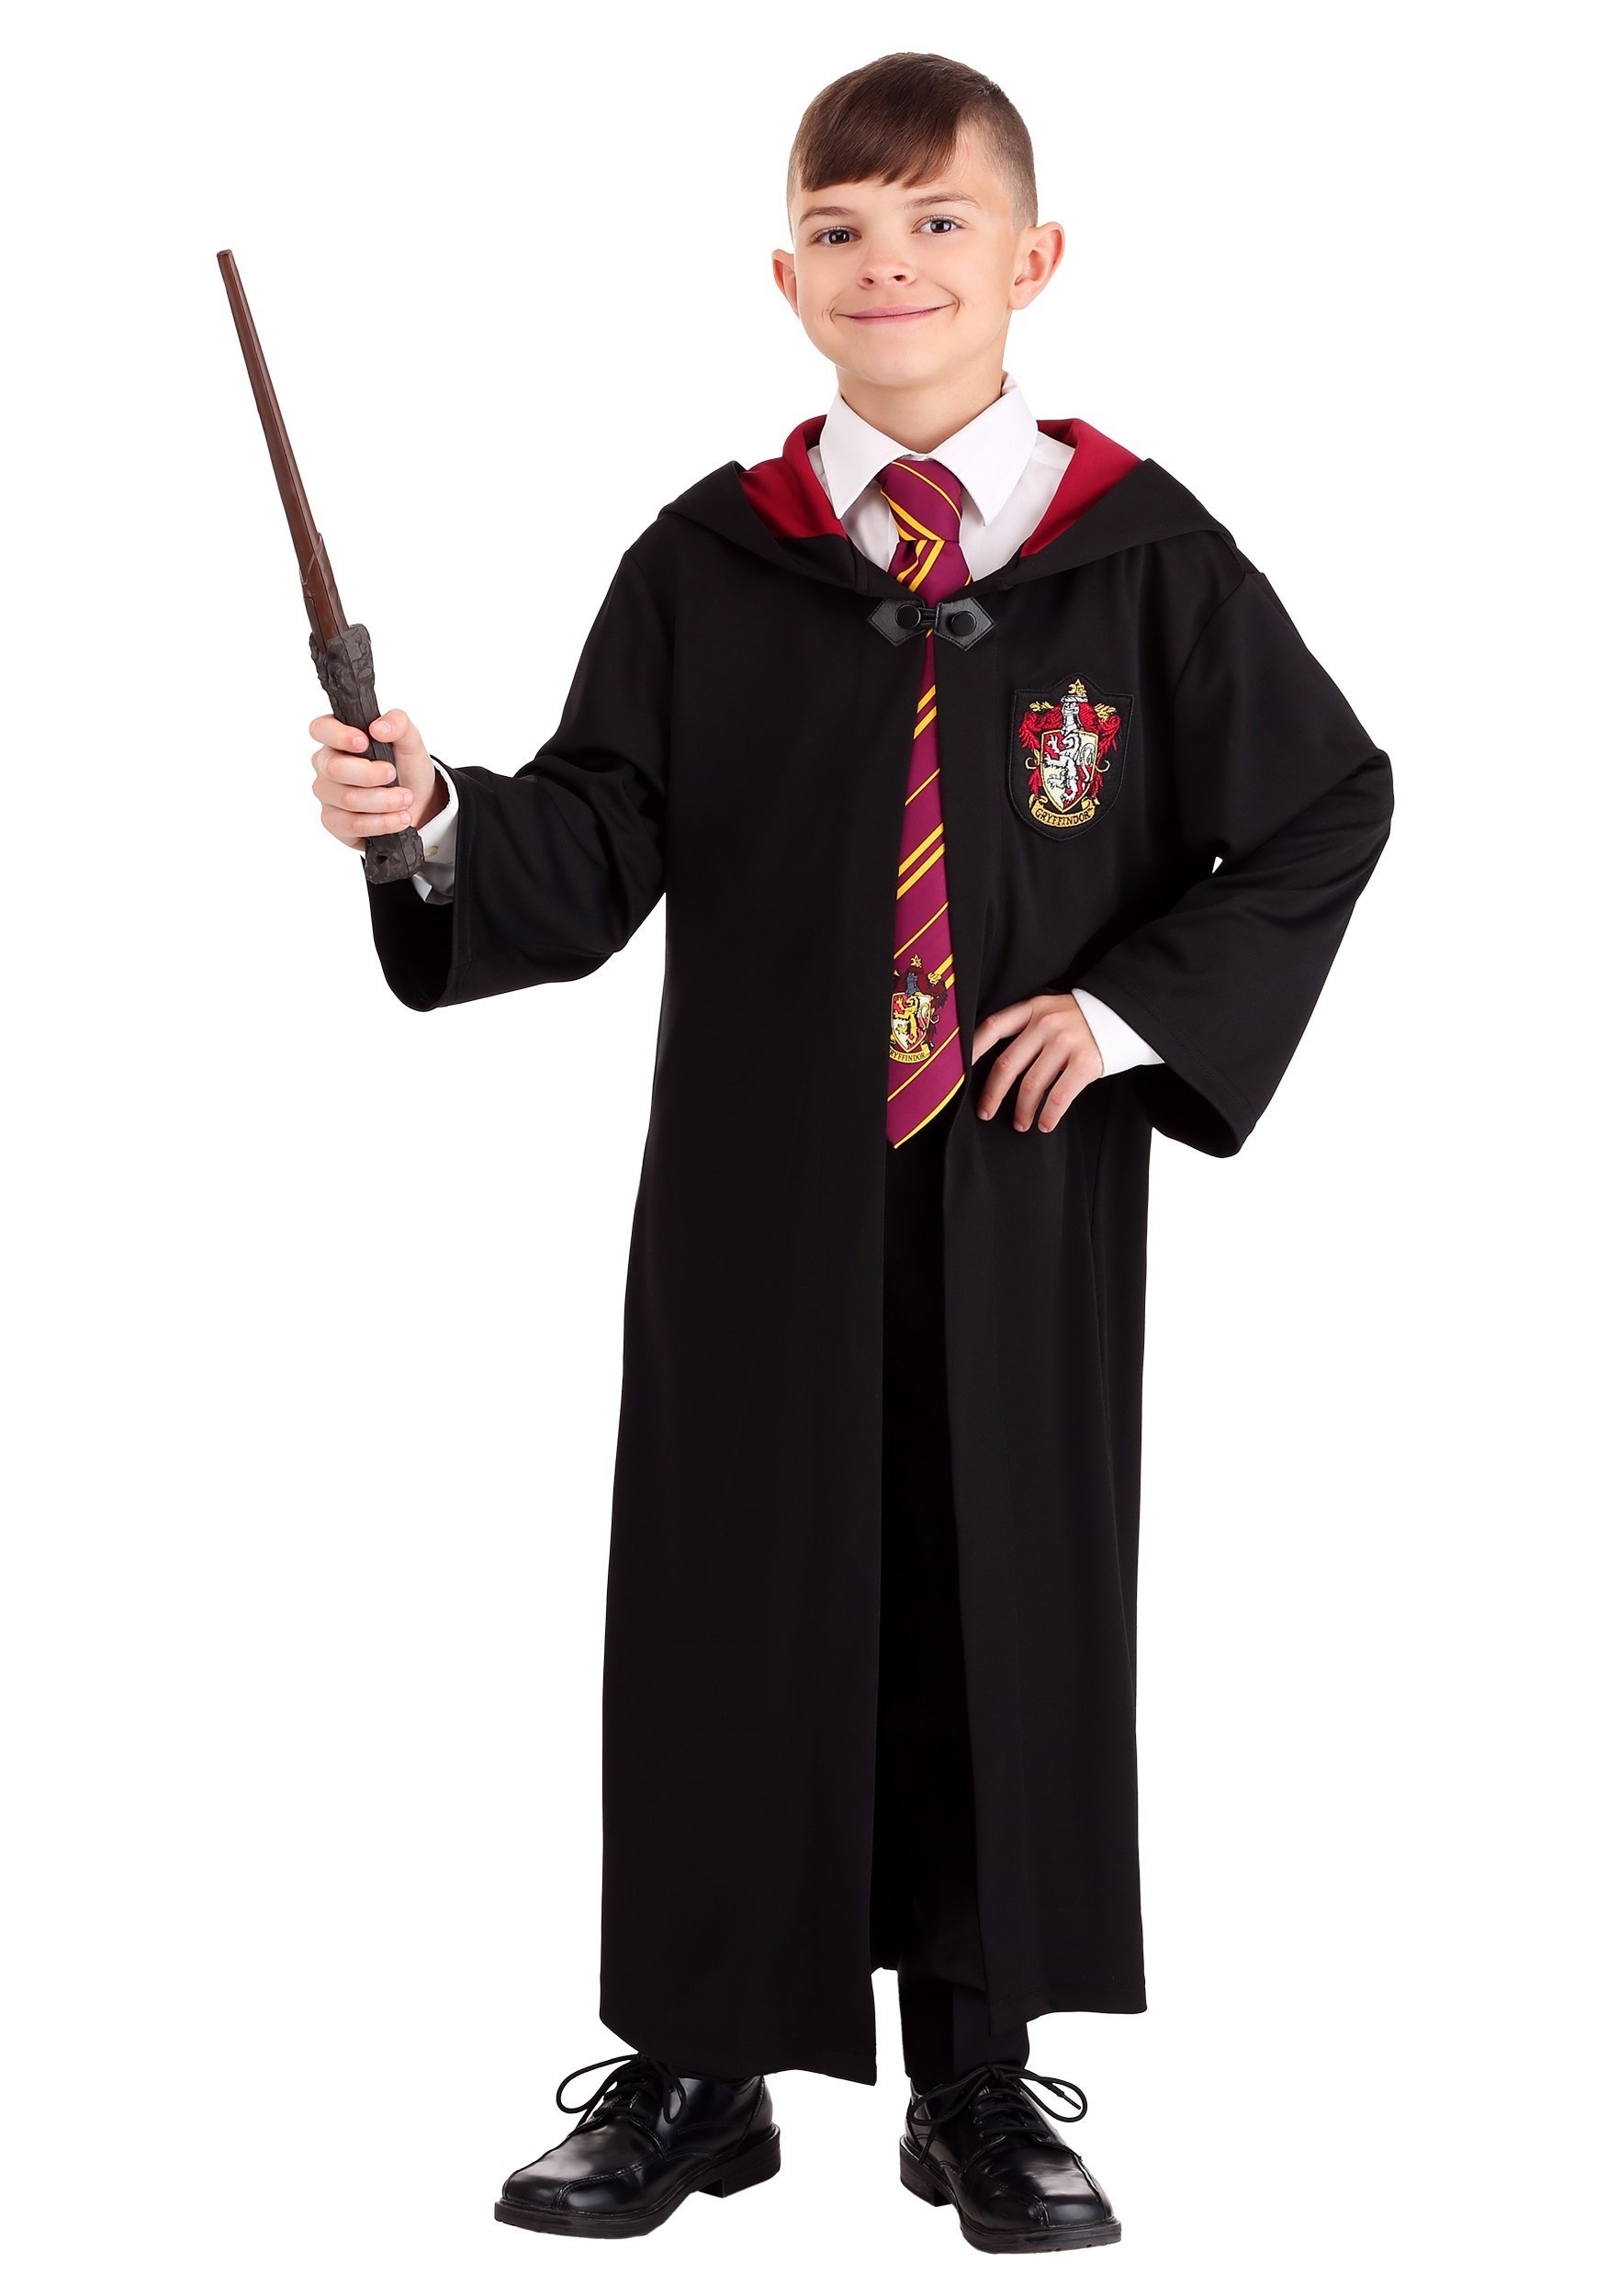 Photos - Fancy Dress Potter Jerry Leigh Harry  Gryffindor Robe Costume for Kids Black/Red FU 